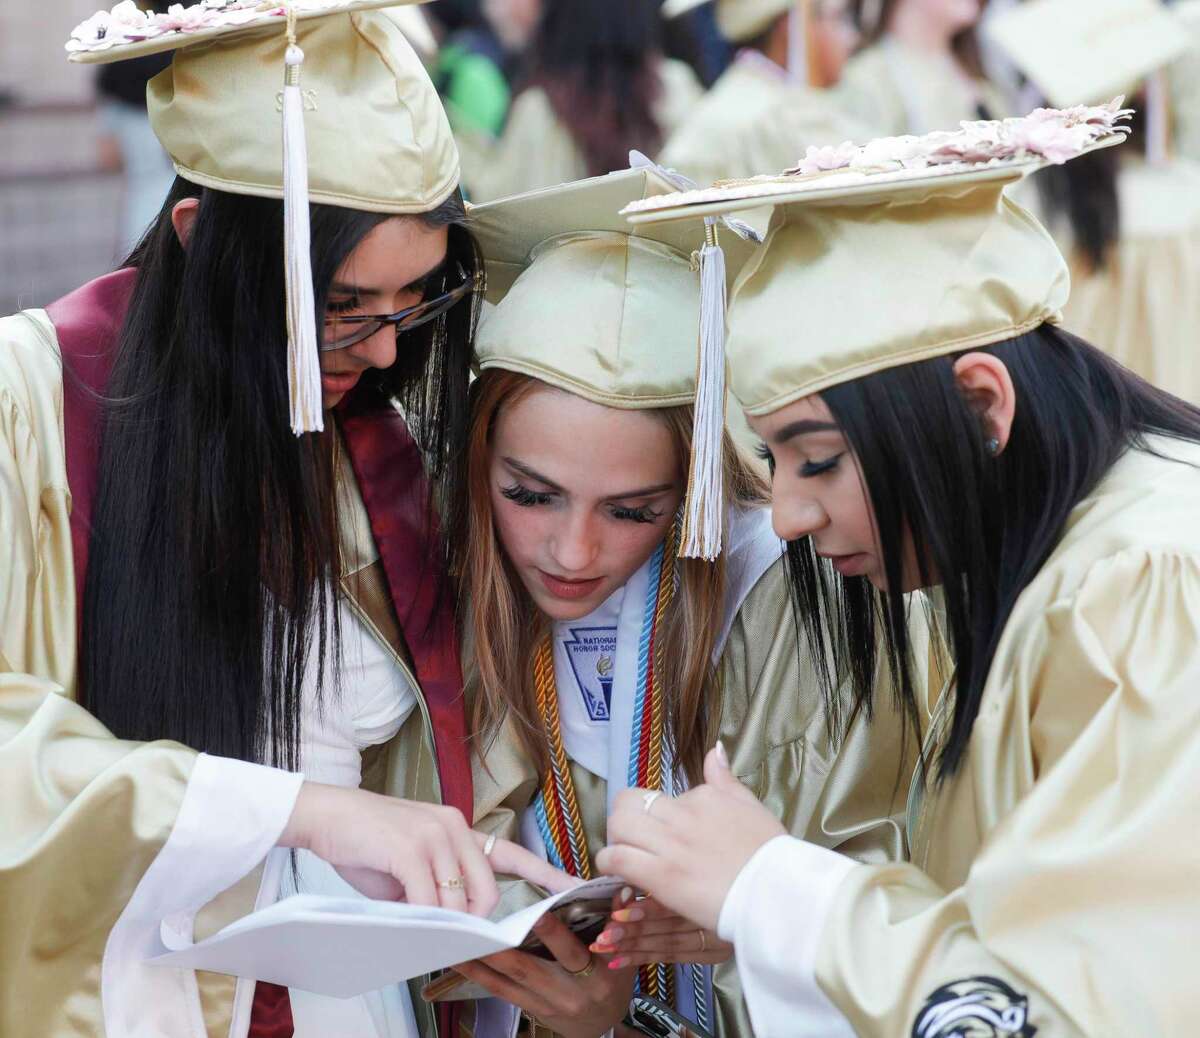 Natalia Rodriguez, Luisa Aloise and Brissa Elvira check the program before a graduation ceremony for Conroe High School at Cynthia Woods Mitchell Pavilion, Thursday, May 19, 2022, in The Woodlands.